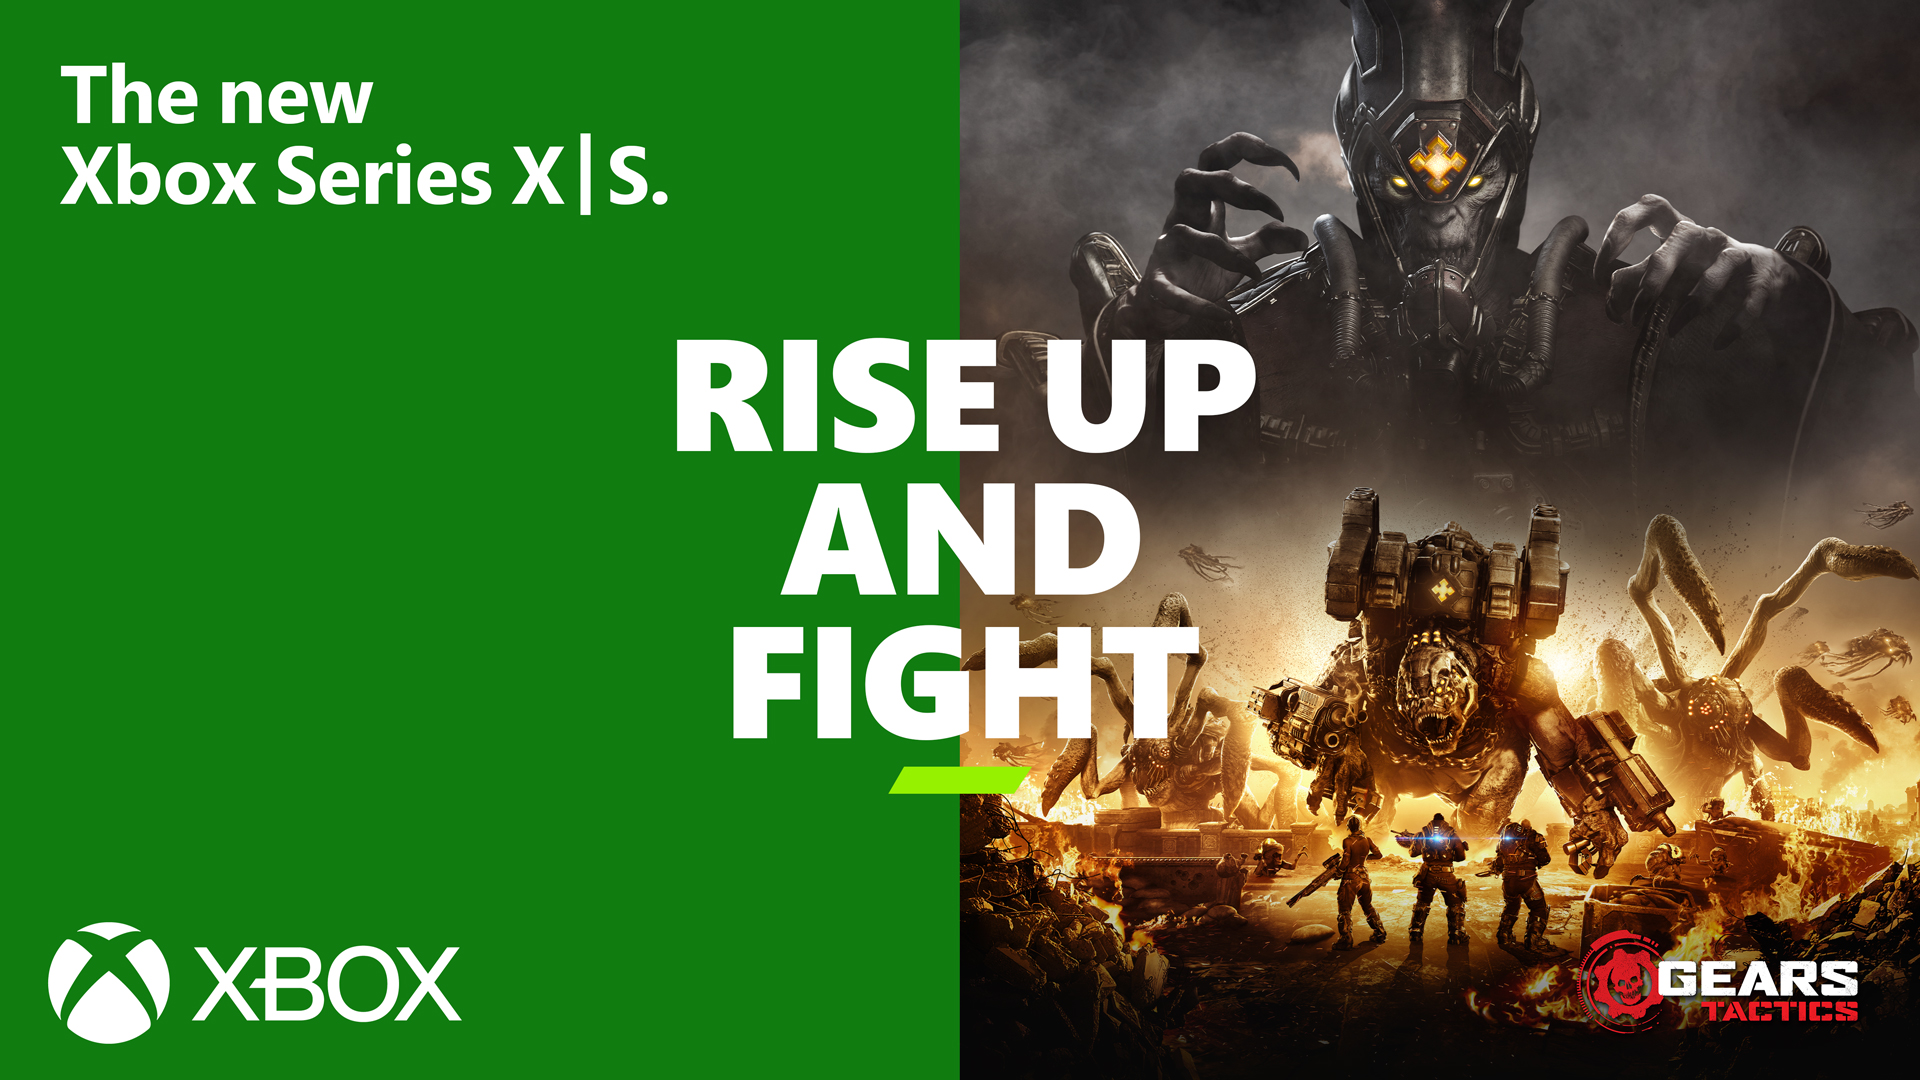 Coming Soon to Xbox Game Pass: Cloud Gaming, Destiny 2, Night in the Woods,  Company of Heroes 2, and More - Xbox Wire